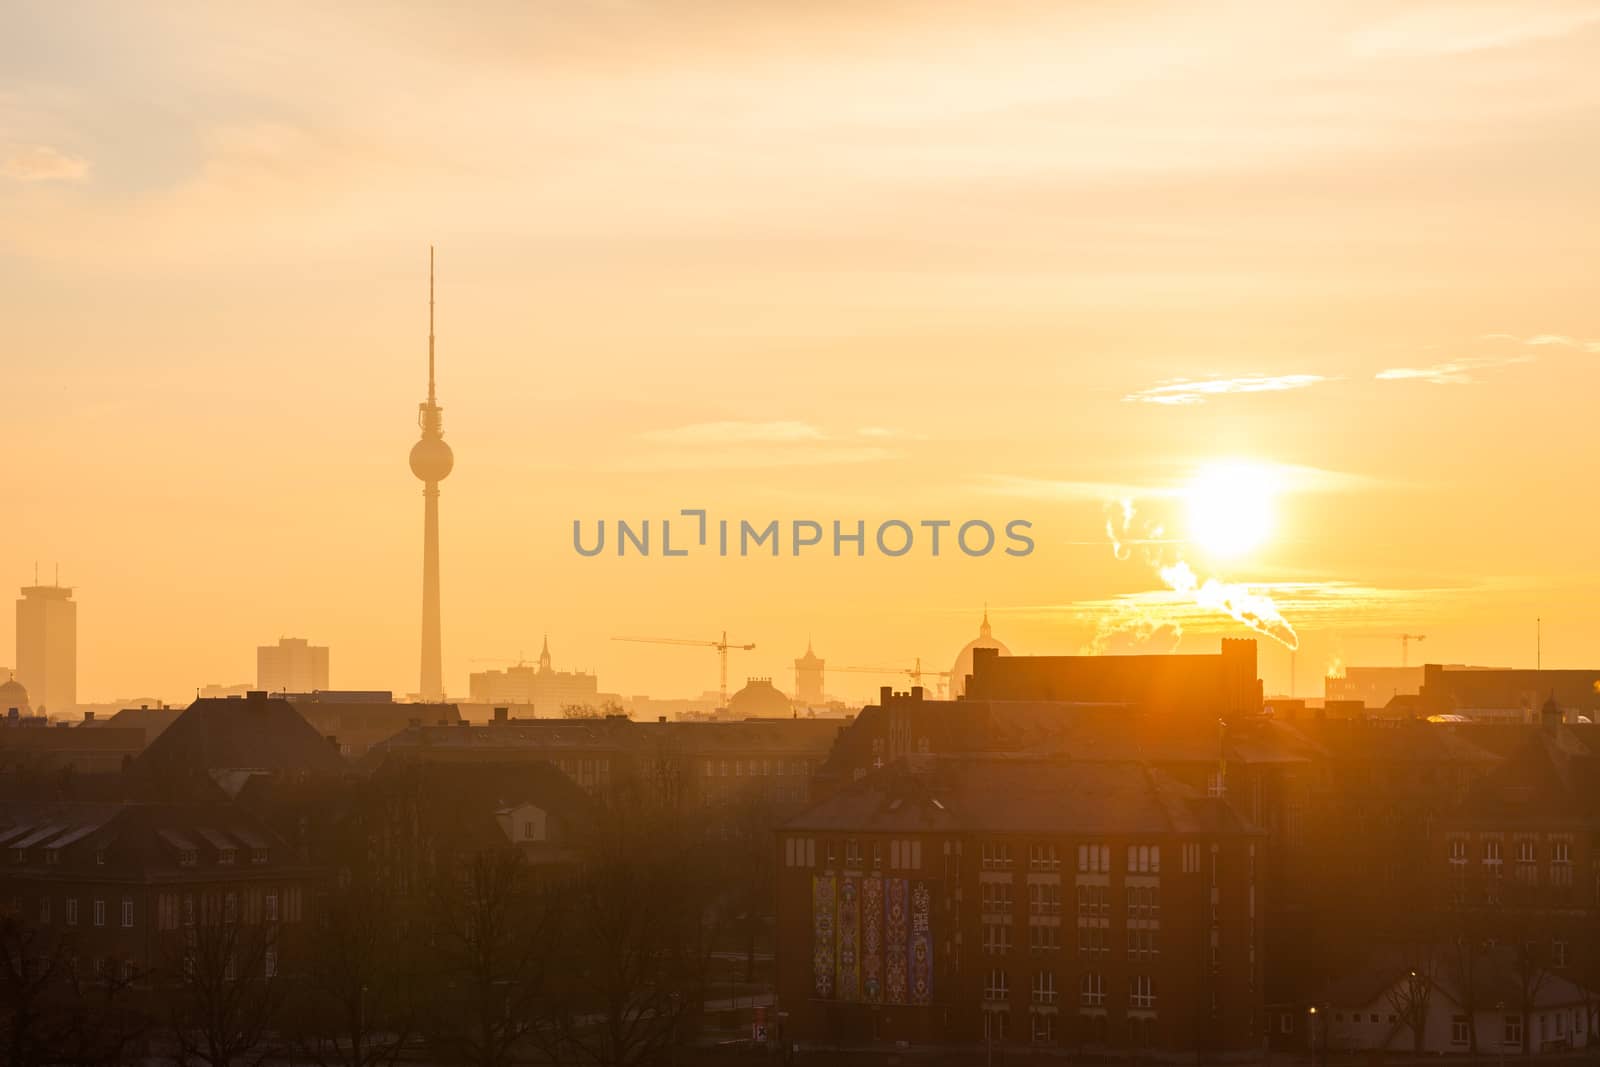 View over Berlin by edan